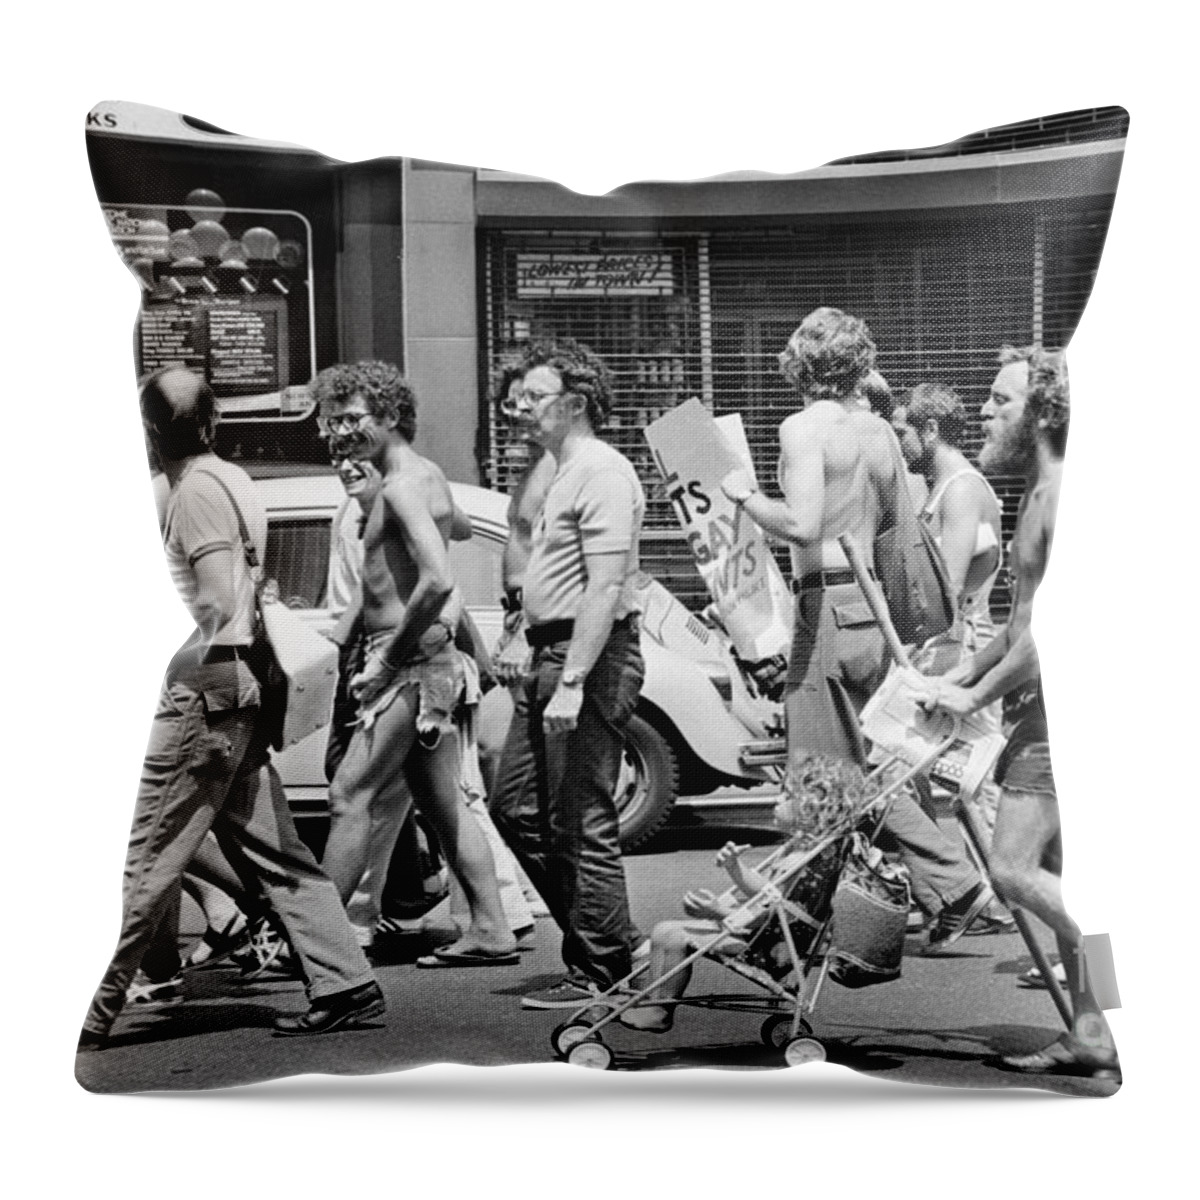 1976 Throw Pillow featuring the photograph Gay Rights March, 1976 by Granger